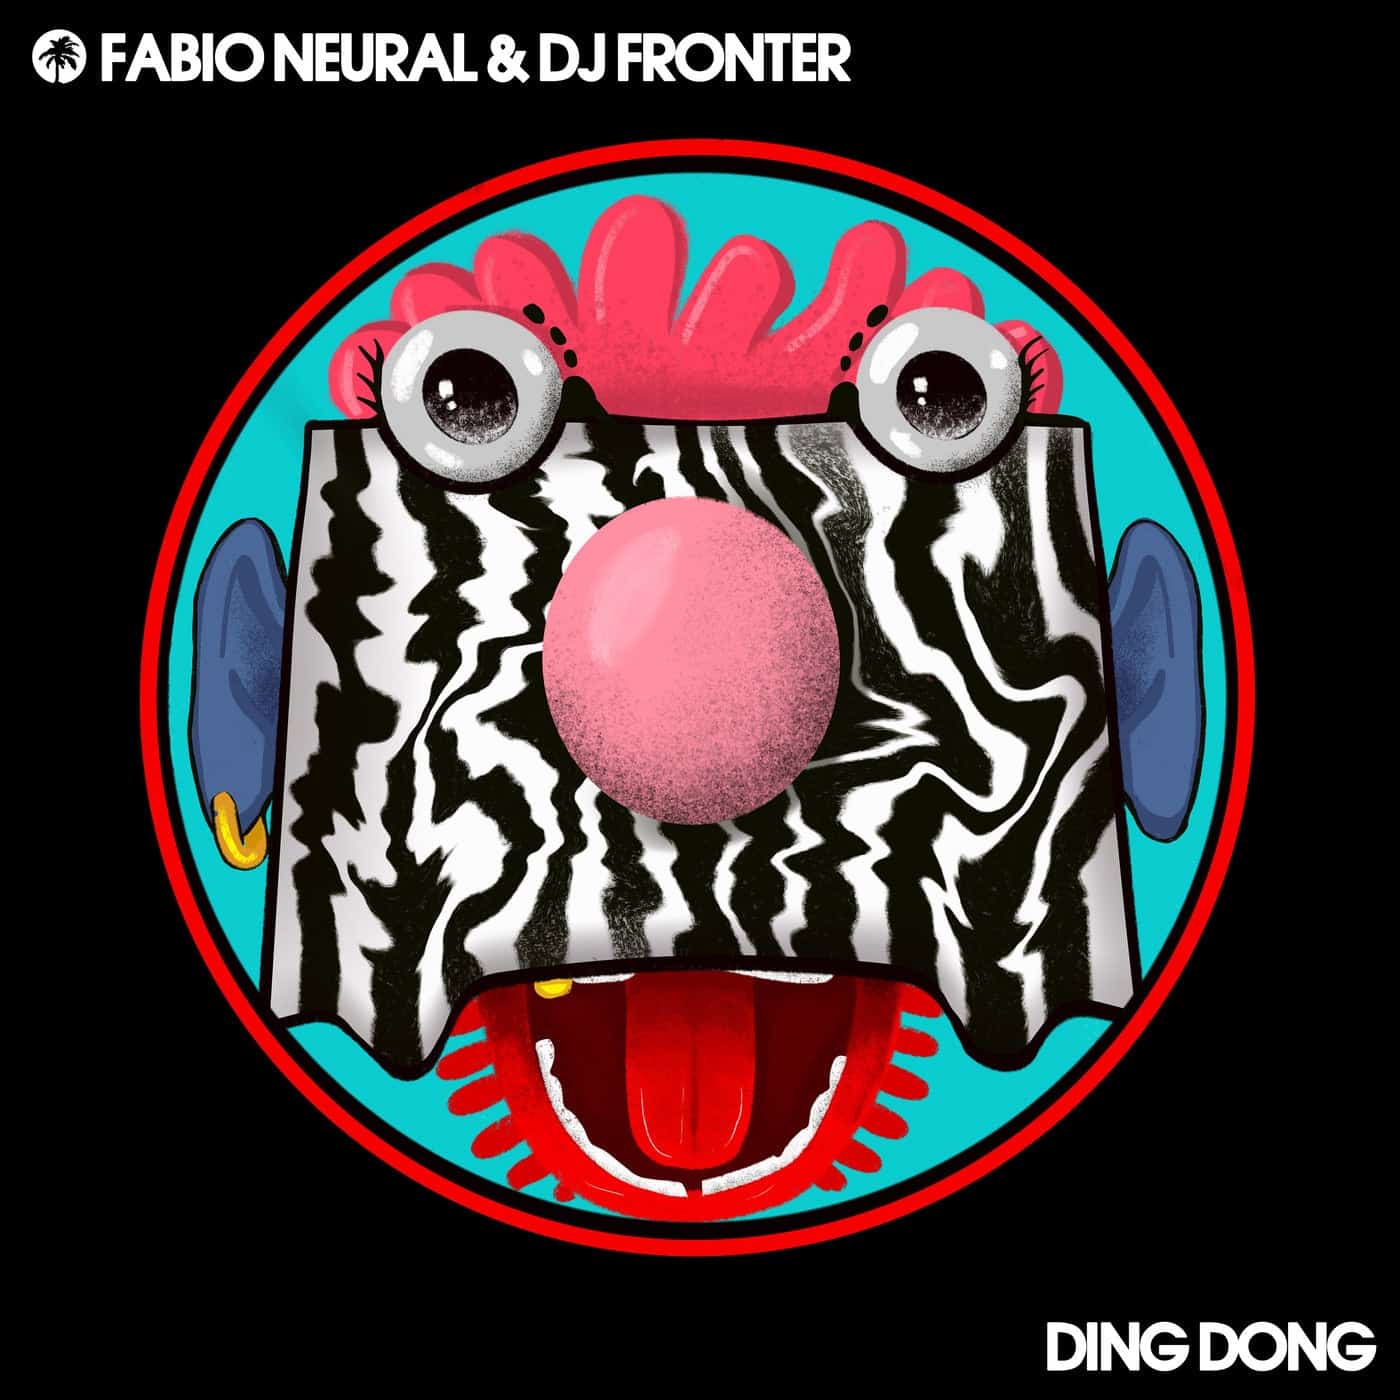 Download Fabio Neural, DJ Fronter - Ding Dong on Electrobuzz